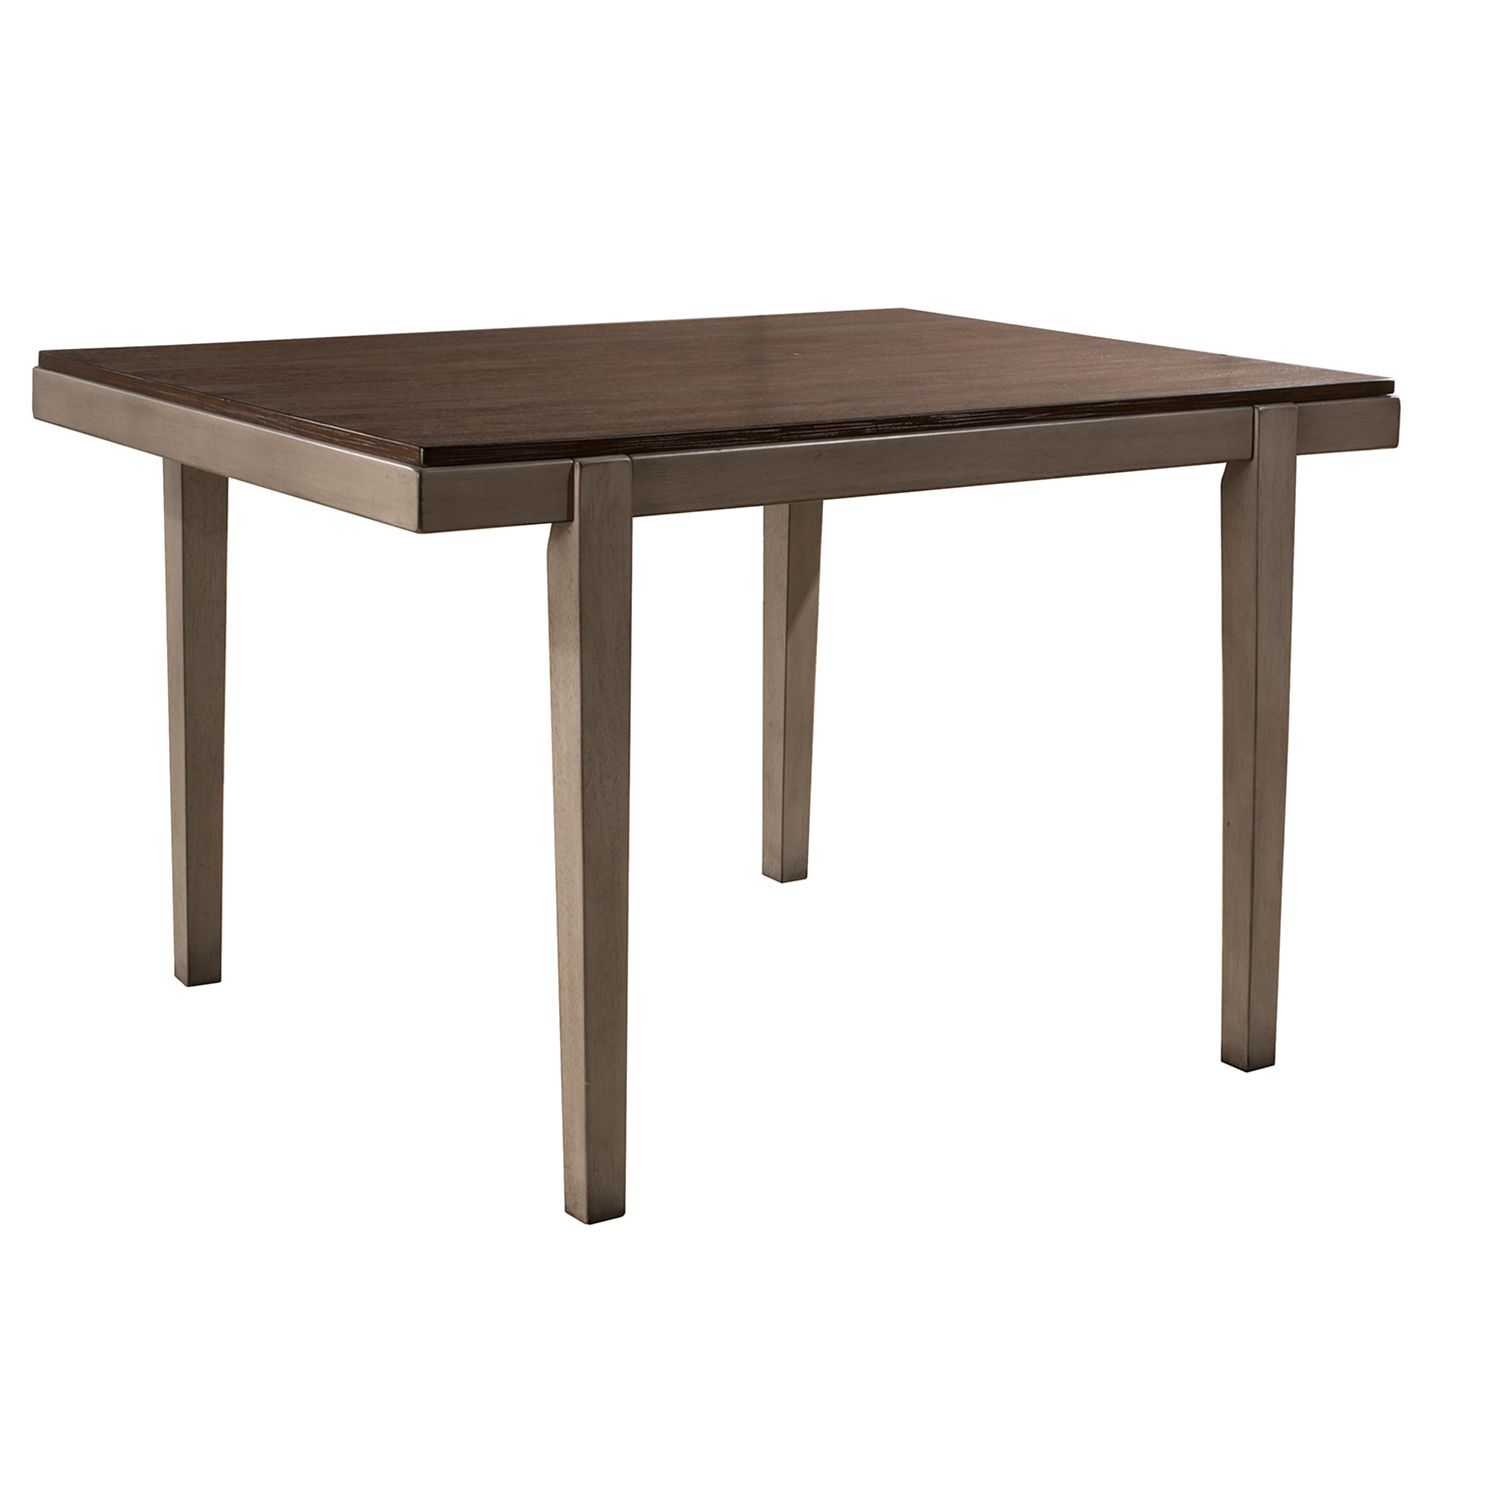 Image for Hillsdale Furniture Garden Park Dining Table at Kohl's.